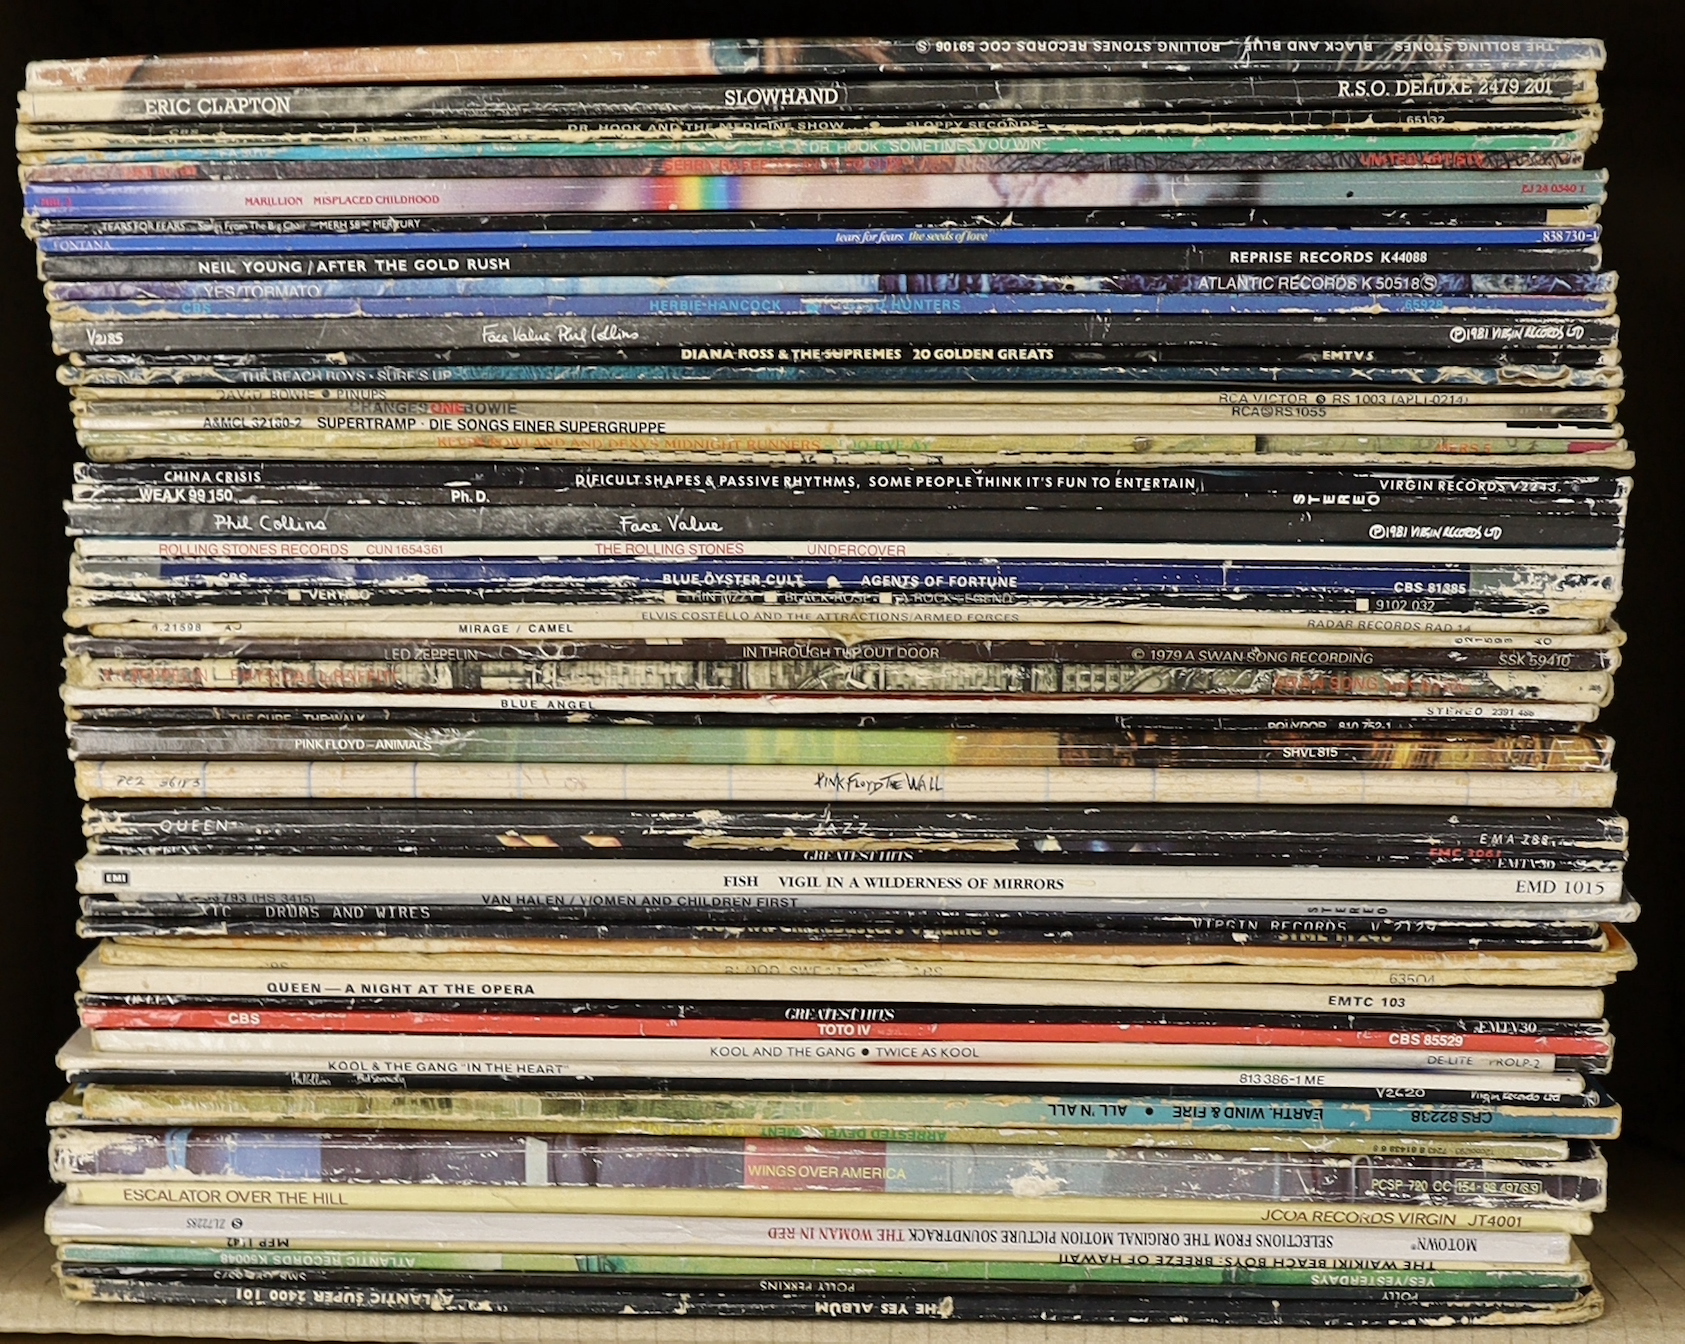 Fifty-eight mostly 1970's/80's LPs etc., including Dr. Hook, Marillion, Neil Young, Yes, T-Rex, Phil Collins, Diana Ross, David Bowie, Supertramp, Camel, Led Zeppelin, Pink Floyd, Queen, etc. notable albums include; In T